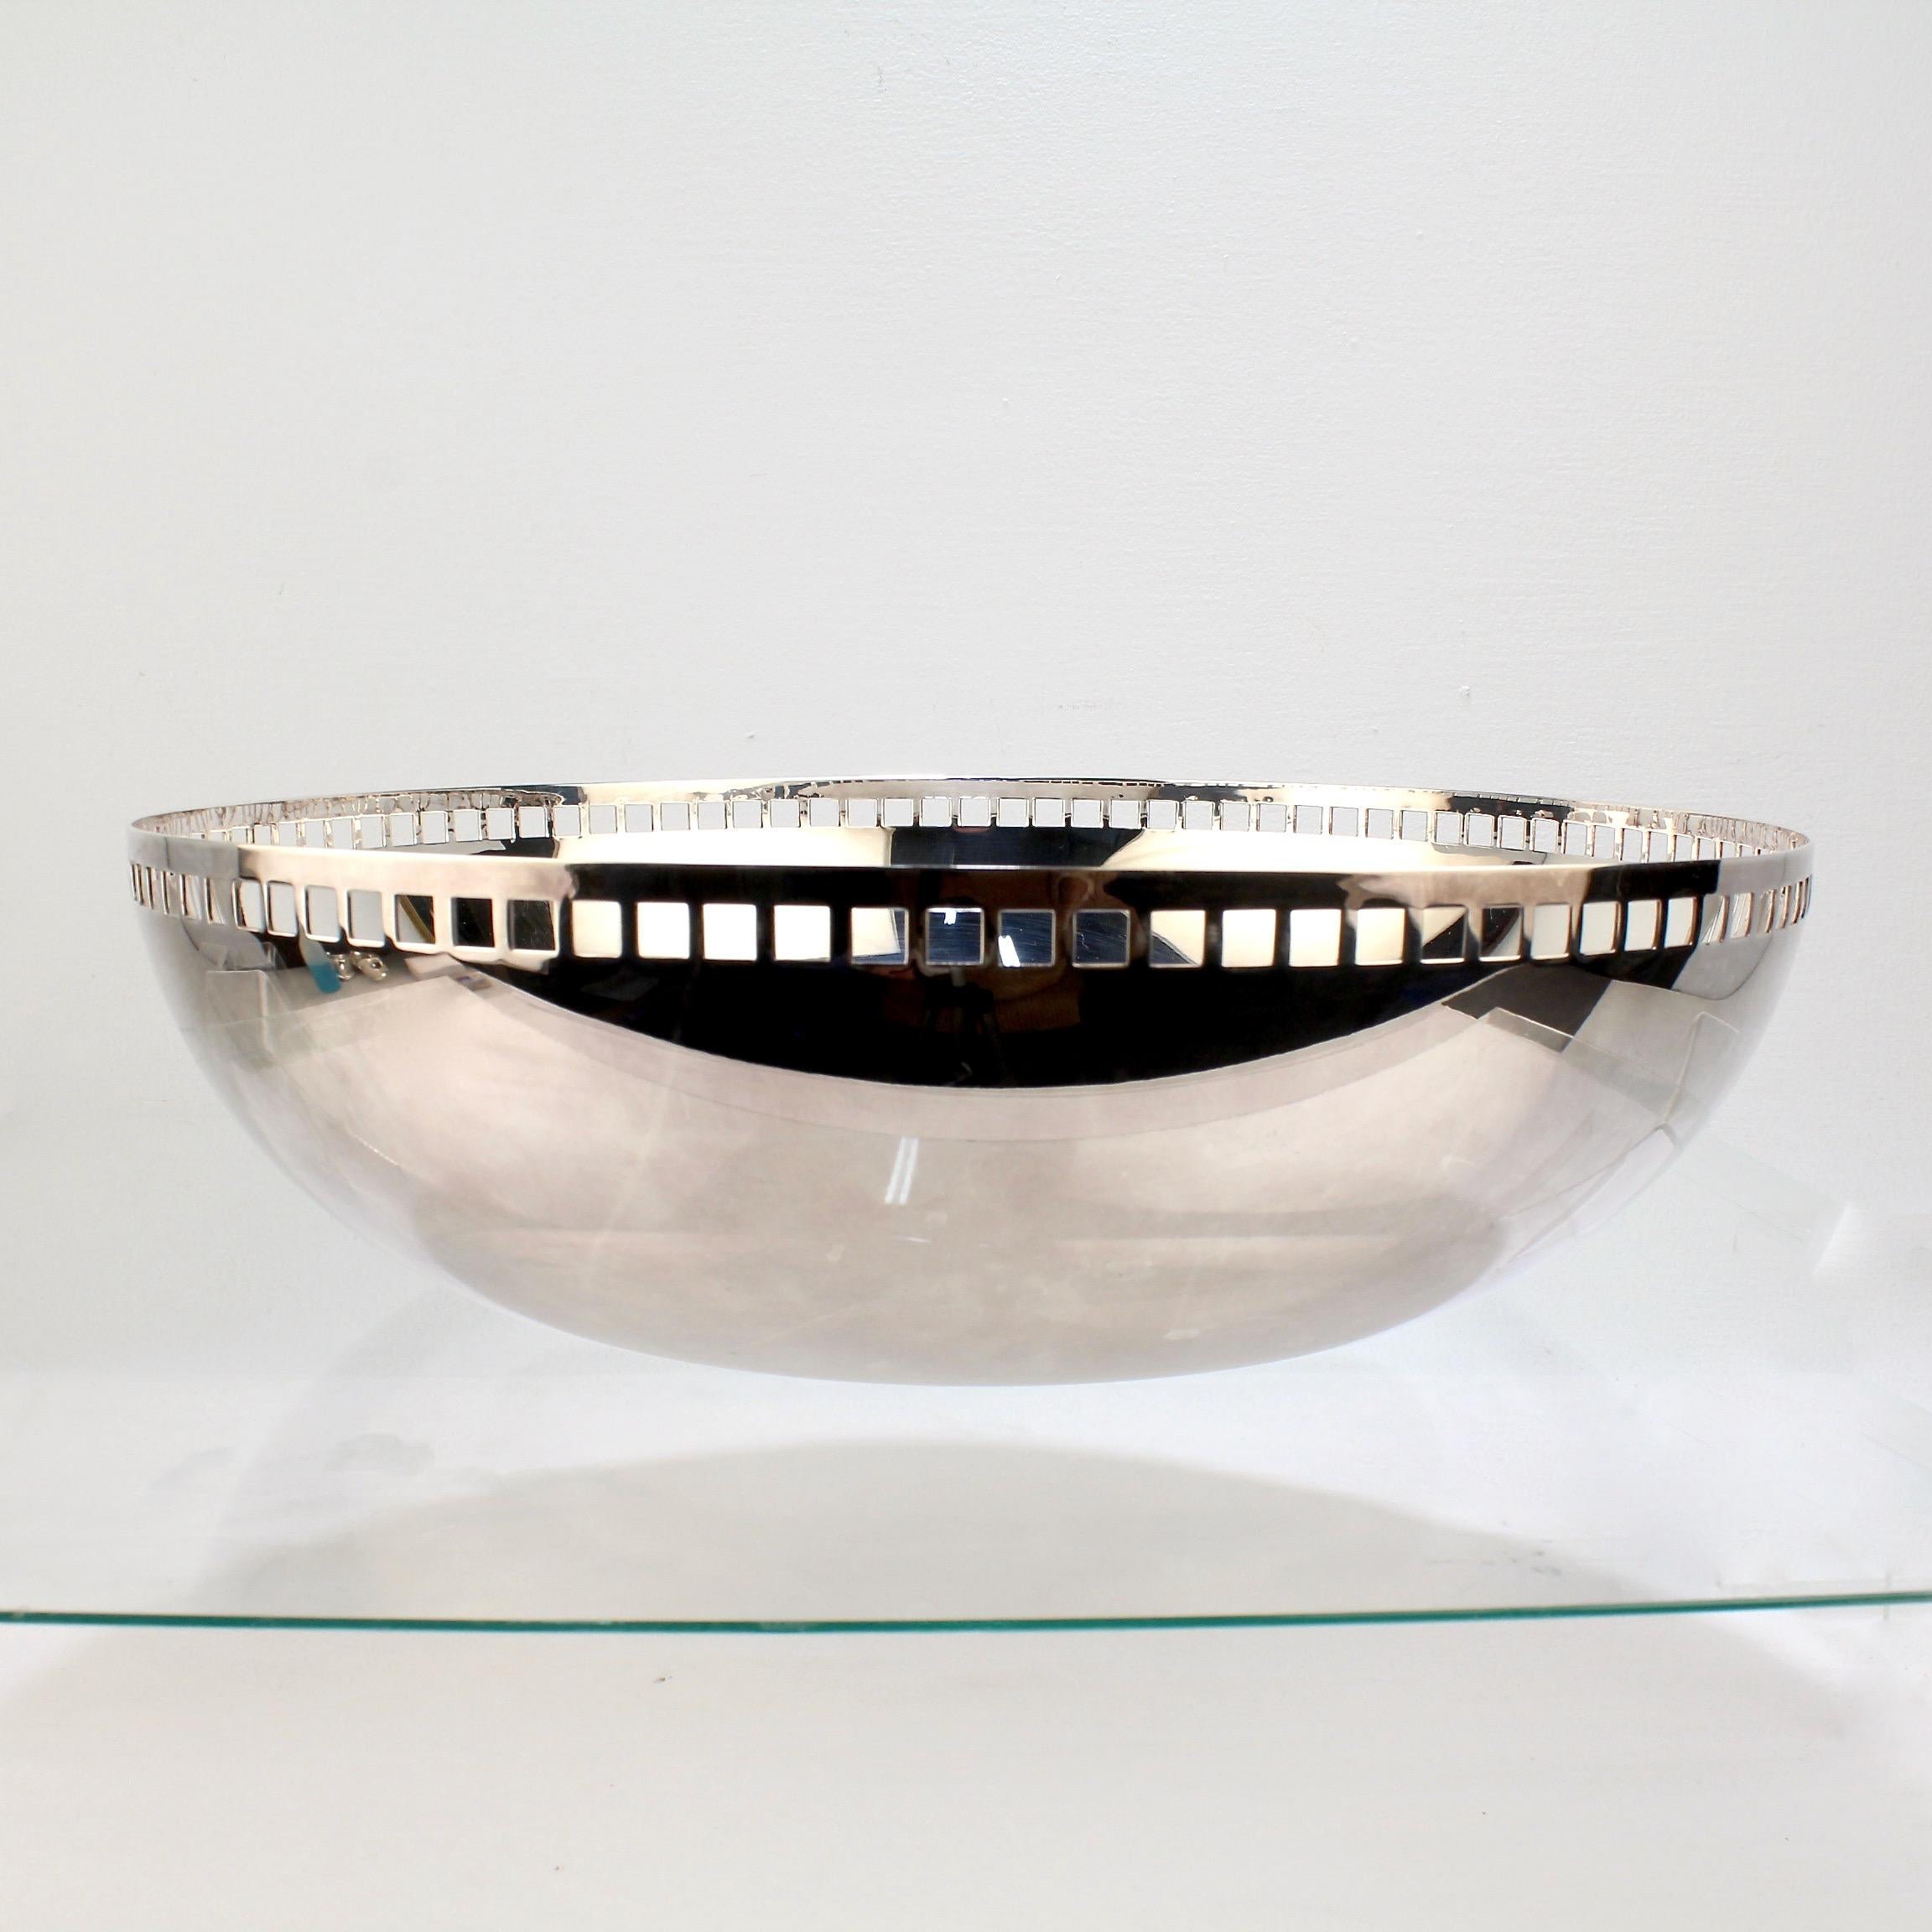 A fine large silver-plated fruit bowl.

Designed by Richard Meier for Swid Powell.

Model no. 3051.

This design was originally named the 'King Richard Bowl' when introduced in 1984. Due to a challenge, the name was changed to 